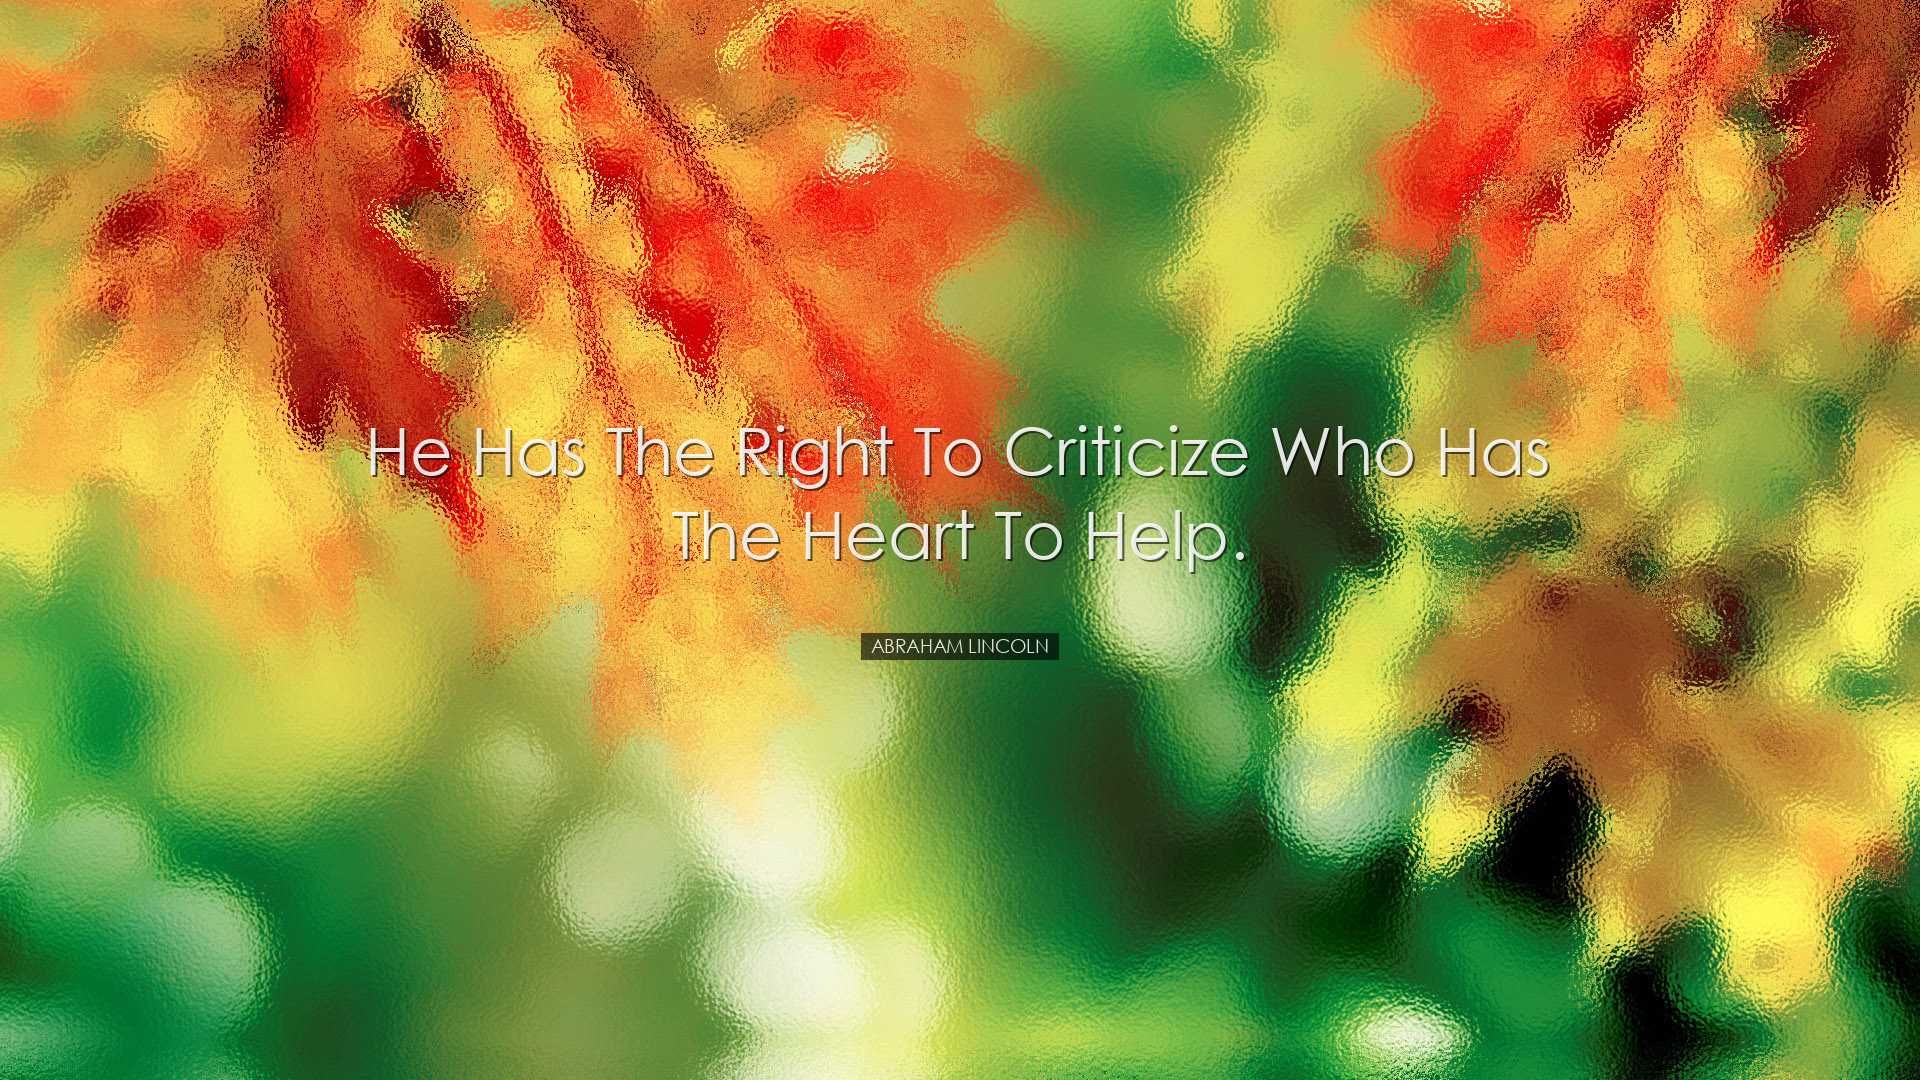 He has the right to criticize who has the heart to help. - Abraham